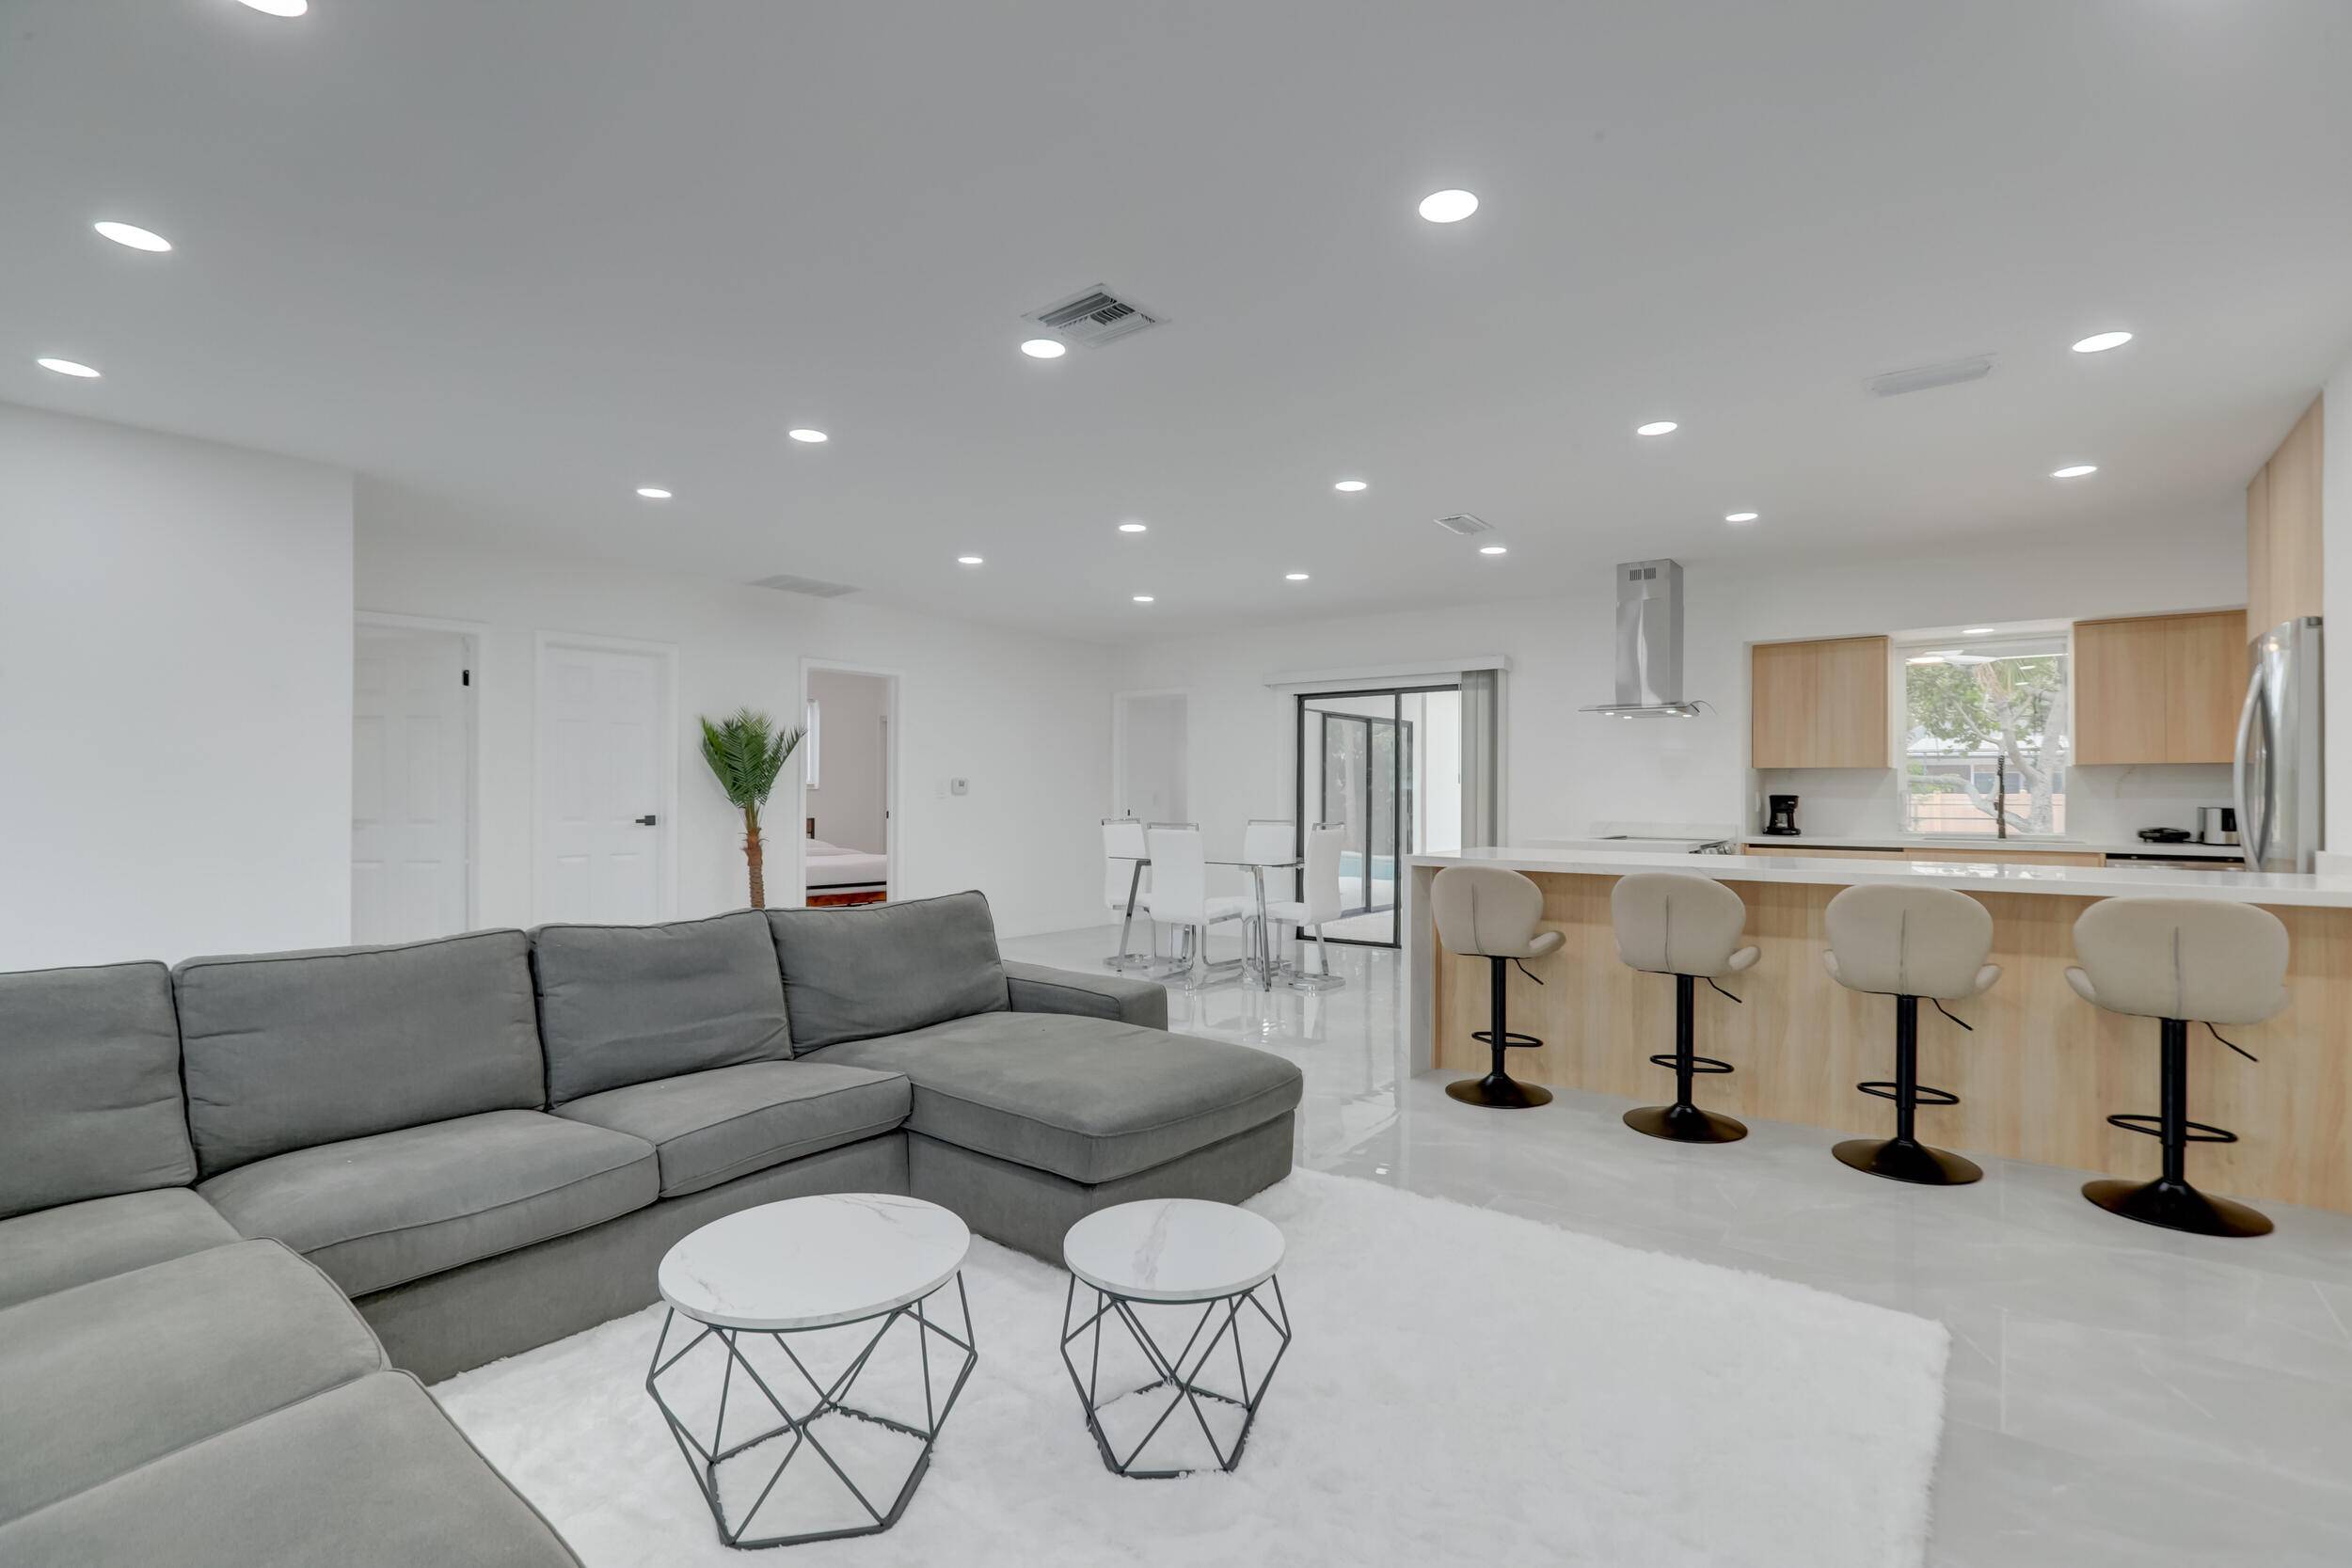 Check out this stunning, fully renovated and furnished house in Hollywood Hills !